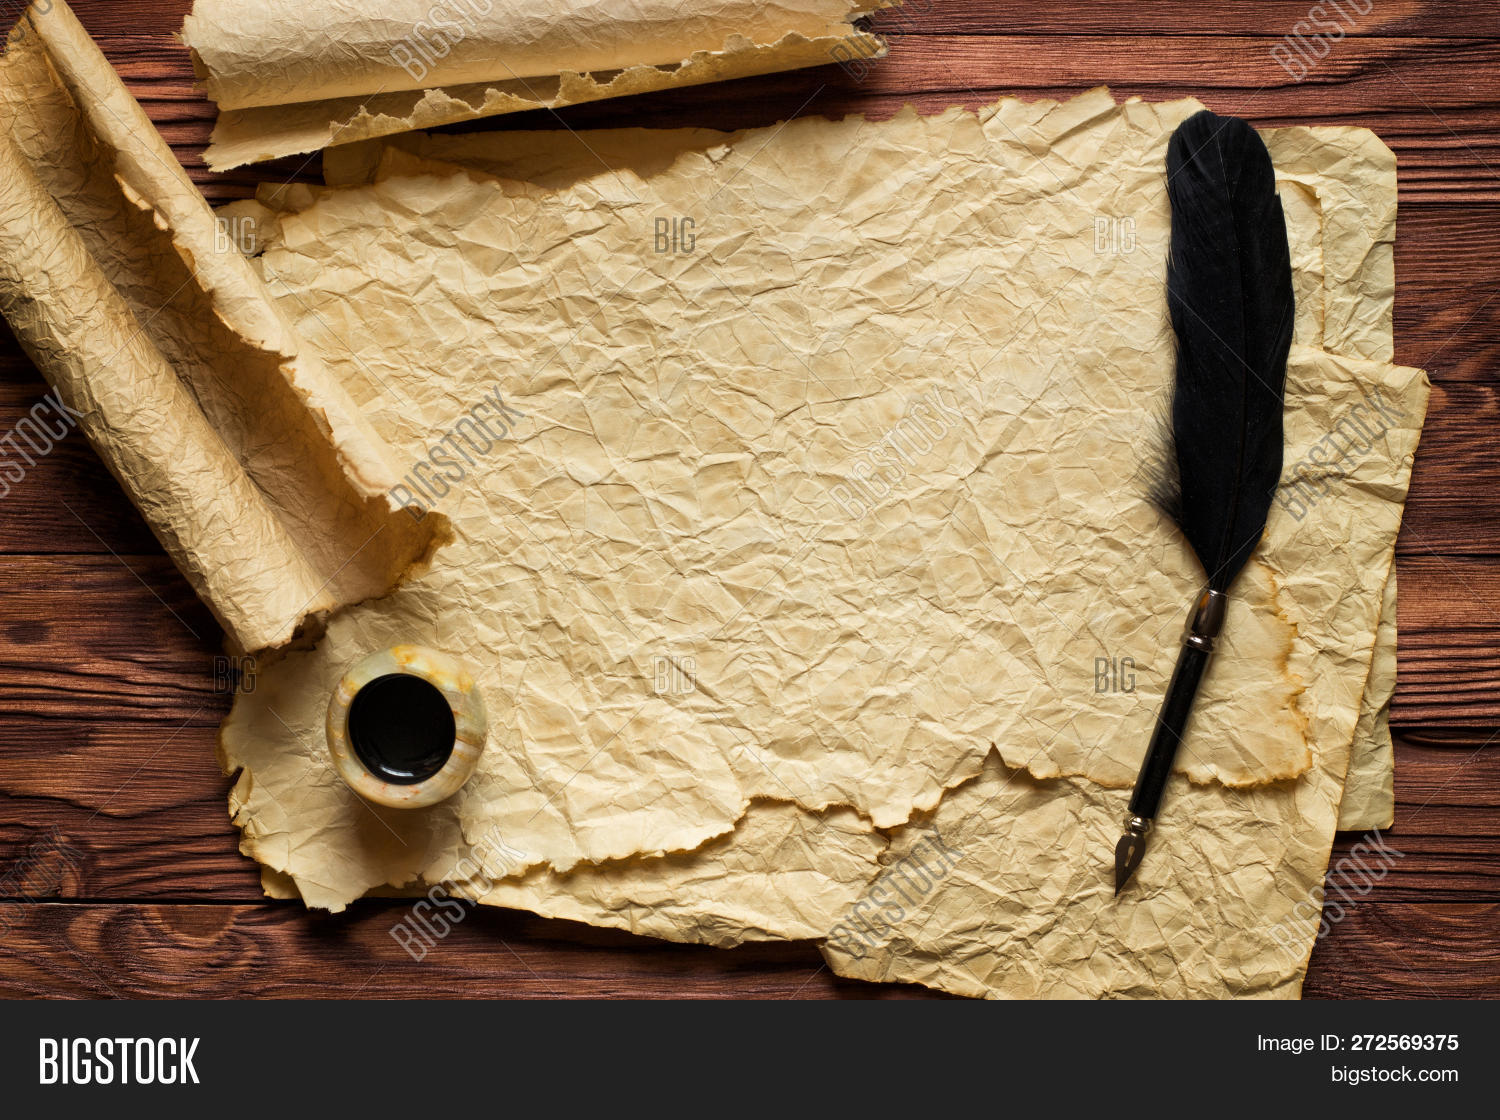 Quill Pen Inkwell On Image Photo Trial Bigstock